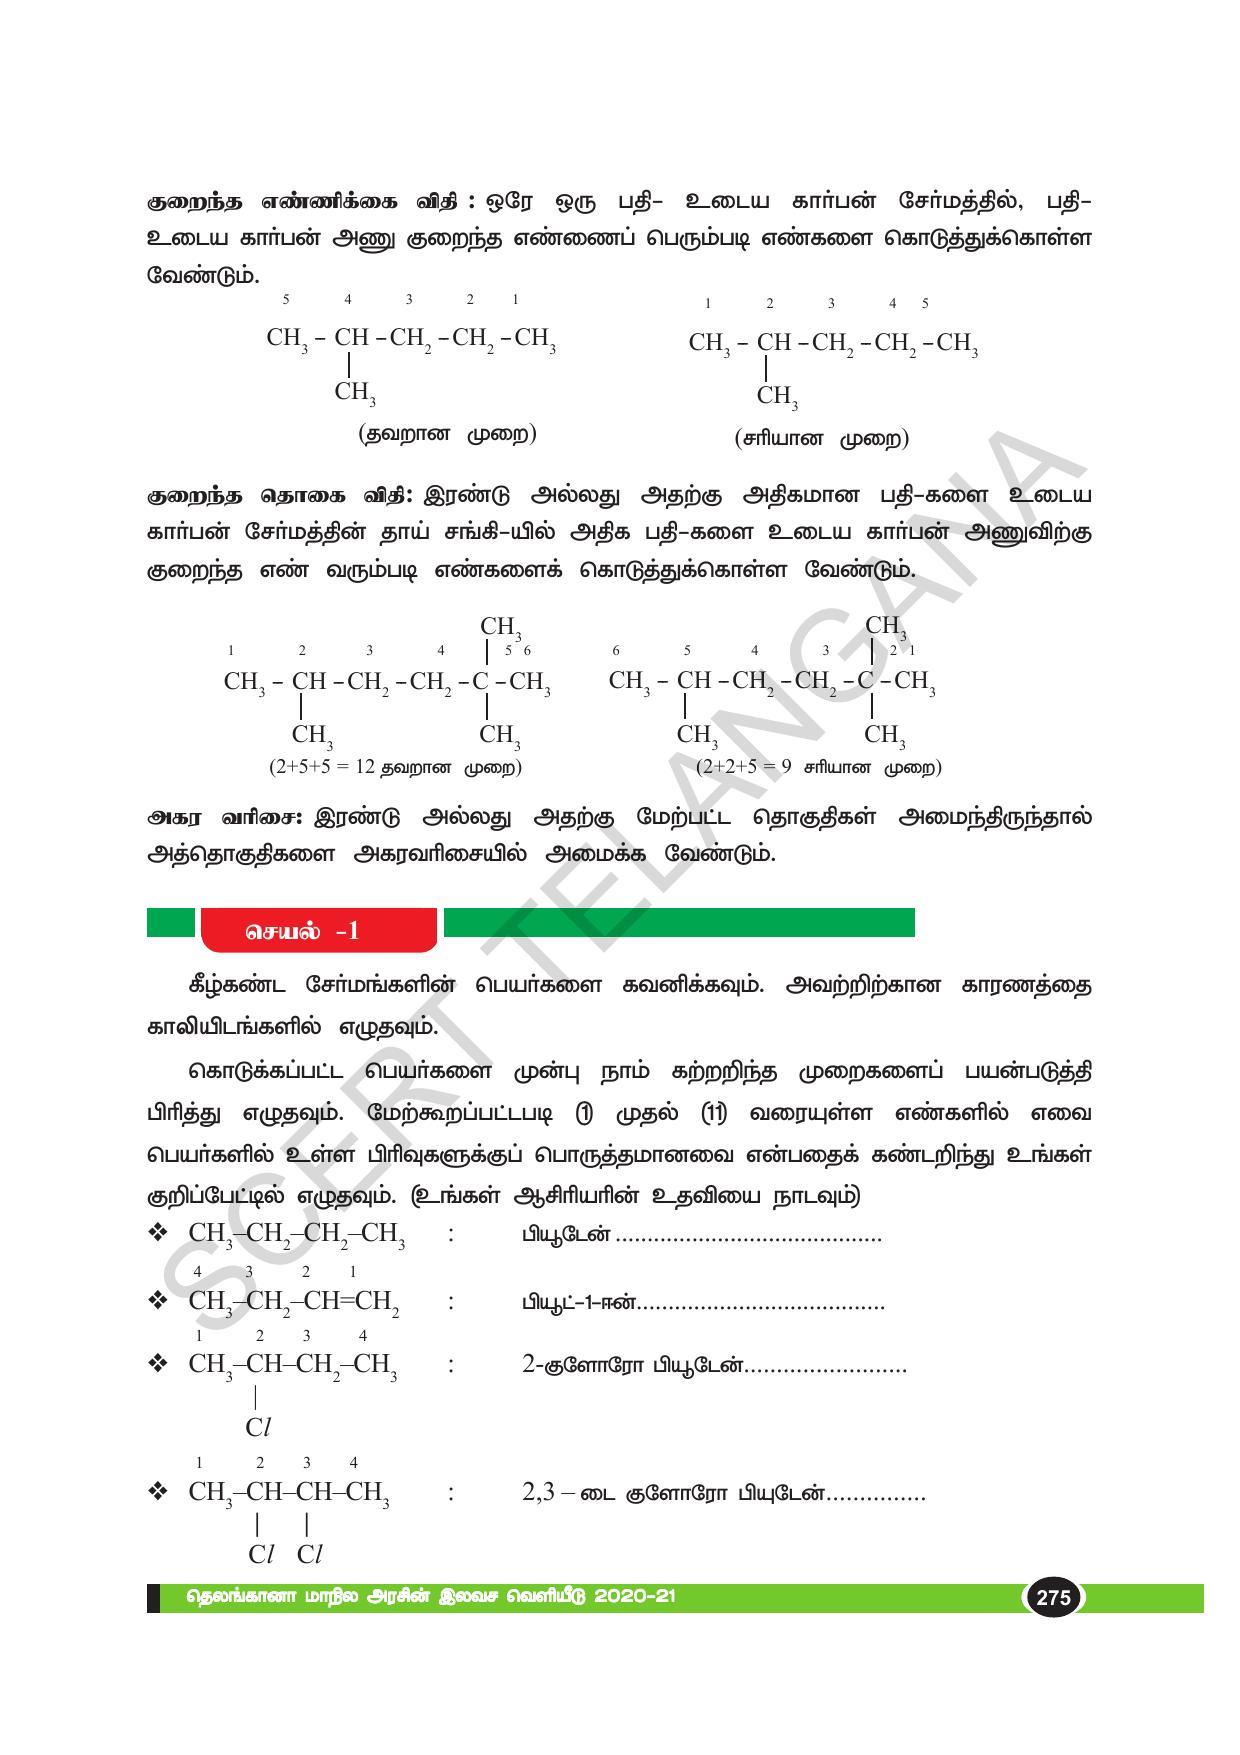 TS SCERT Class 10 Physical Science(Tamil Medium) Text Book - Page 287